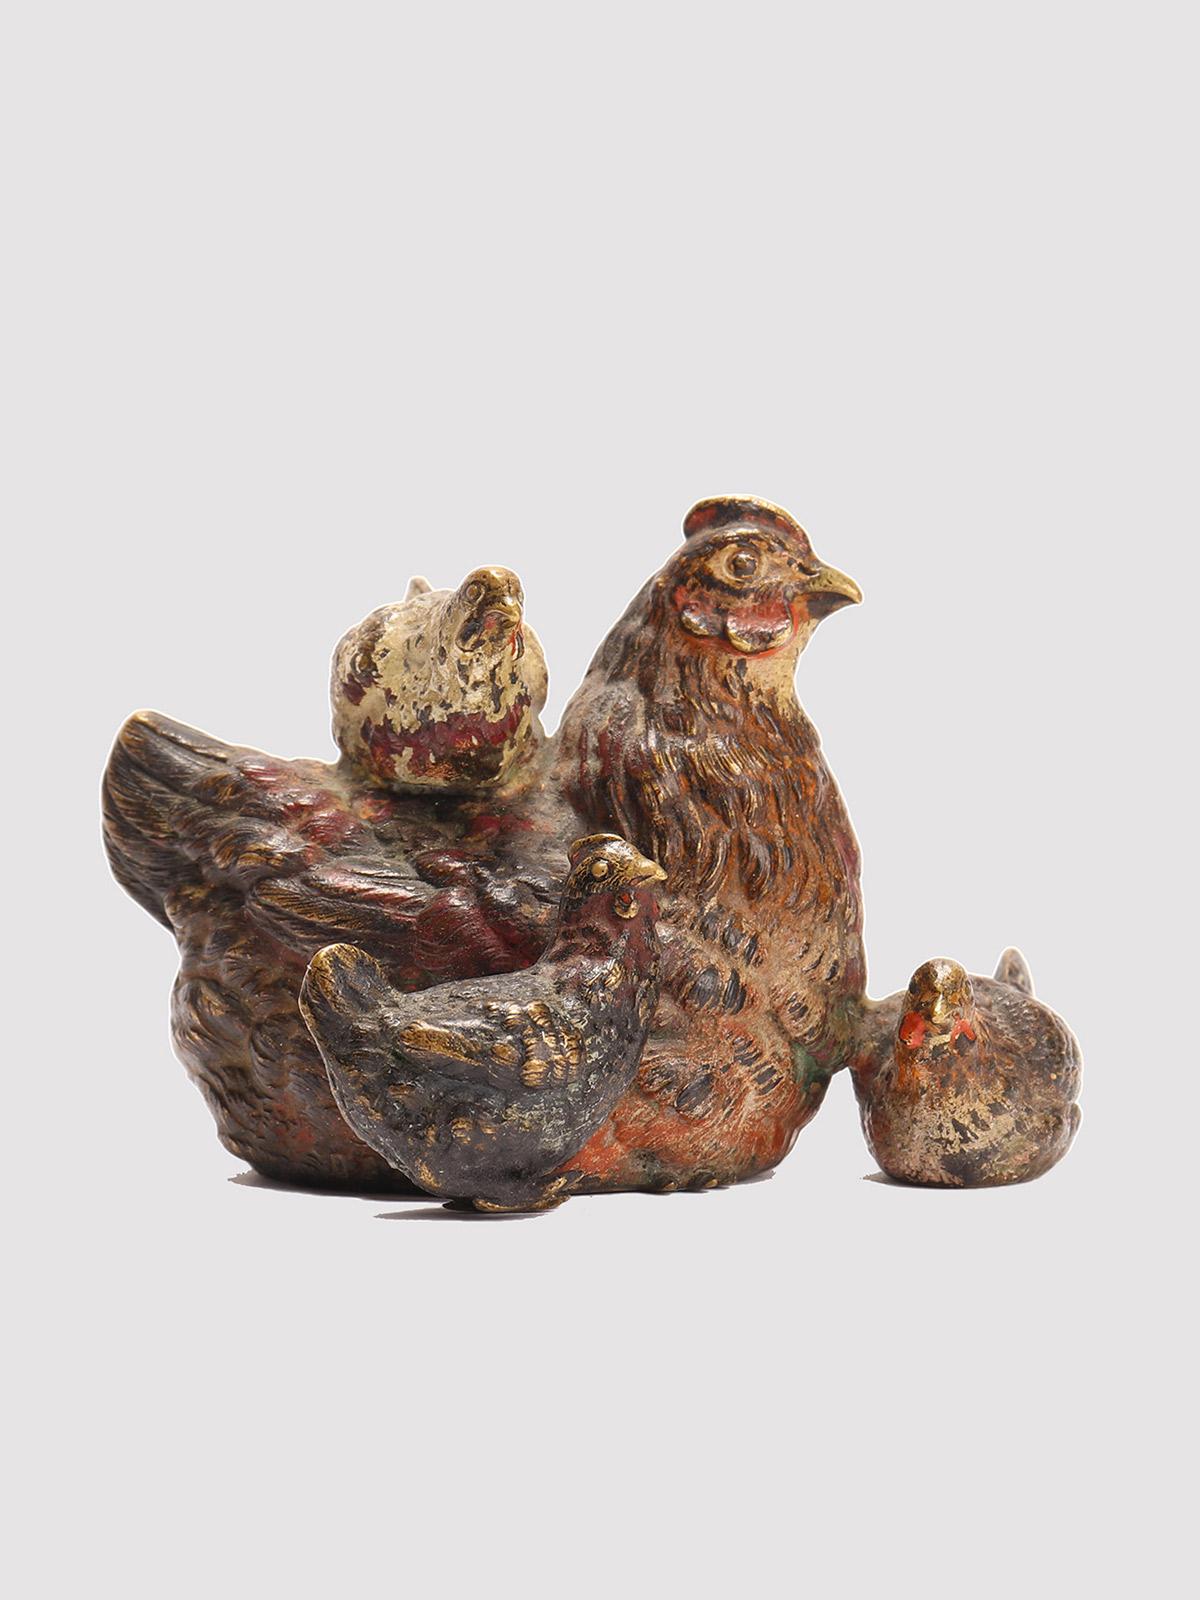 Wiener bronze depicting a hen with chicks. The group is painted in different colors. Wien Austria, circa 1890.